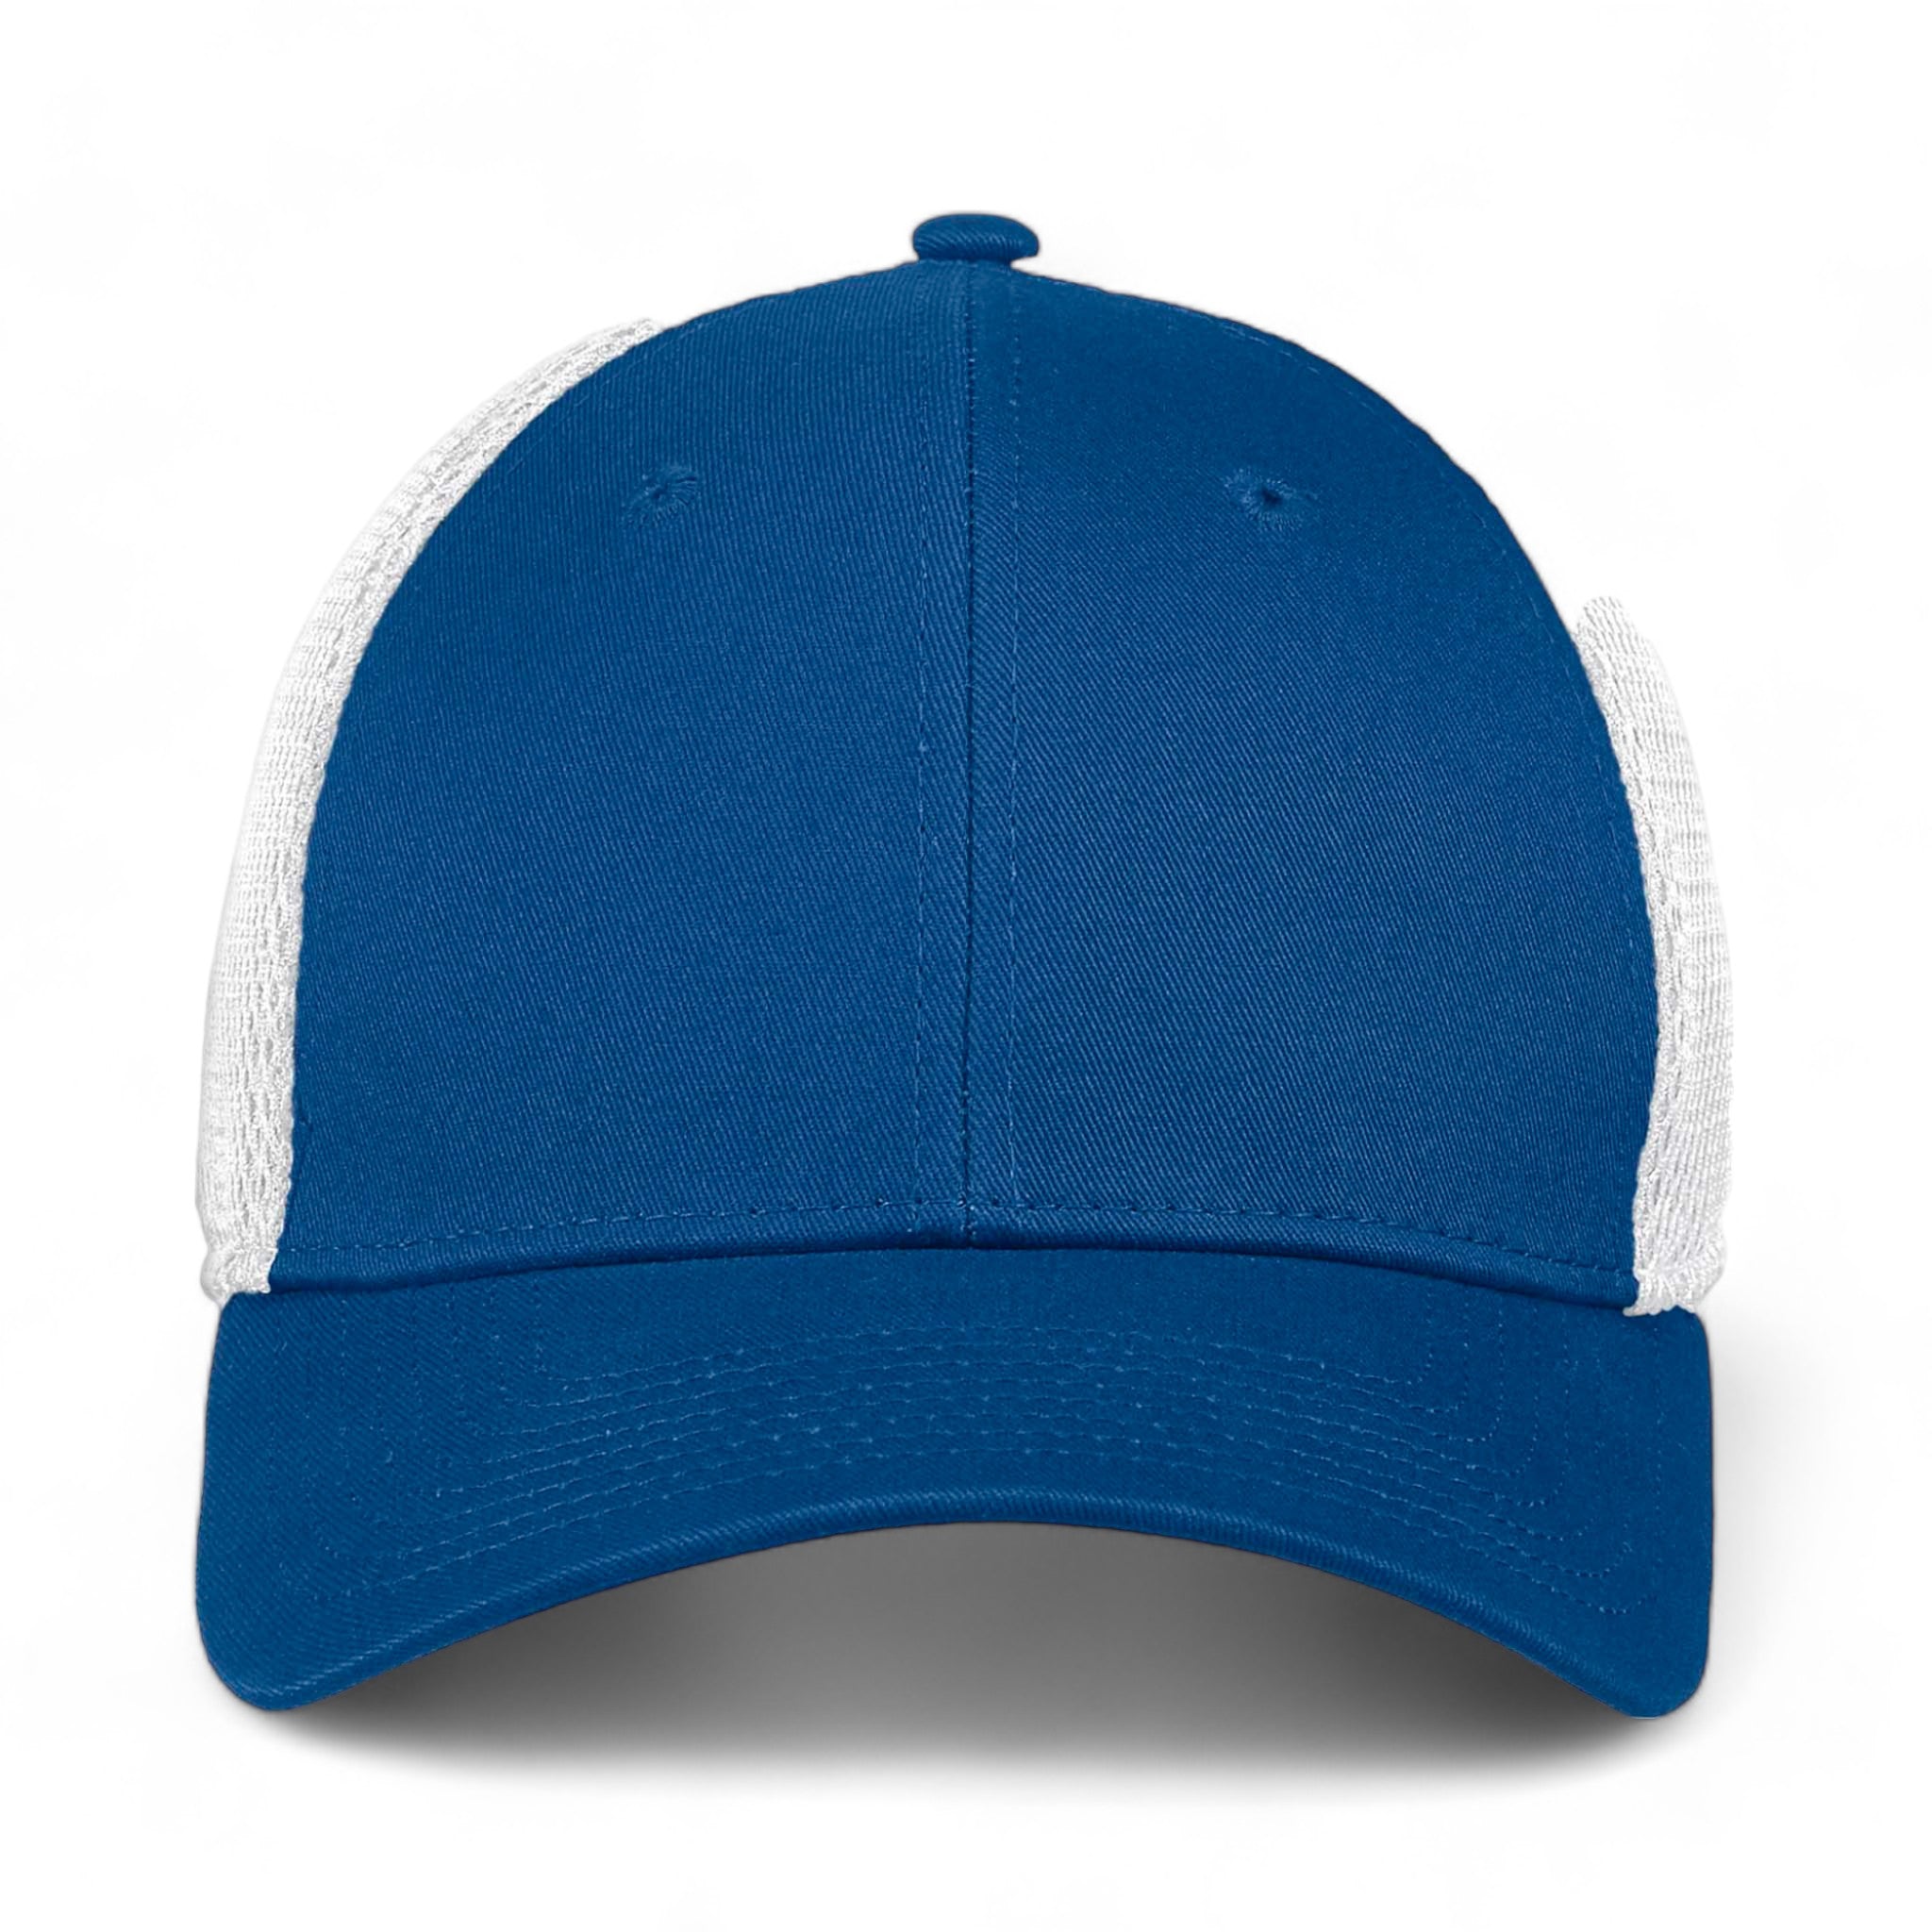 Front view of New Era NE1020 custom hat in royal and white